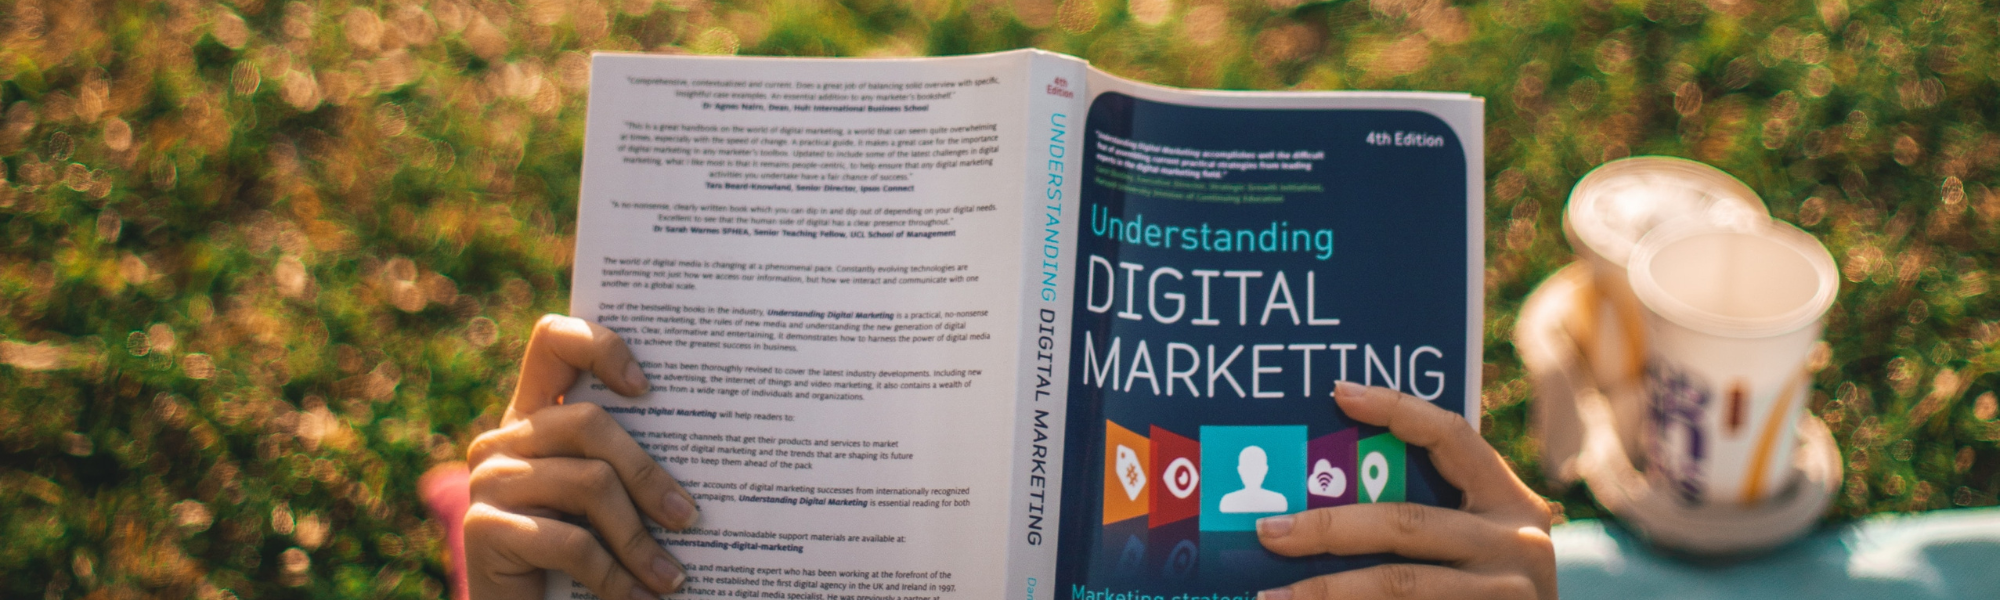 A person studying internet marketing through a book.